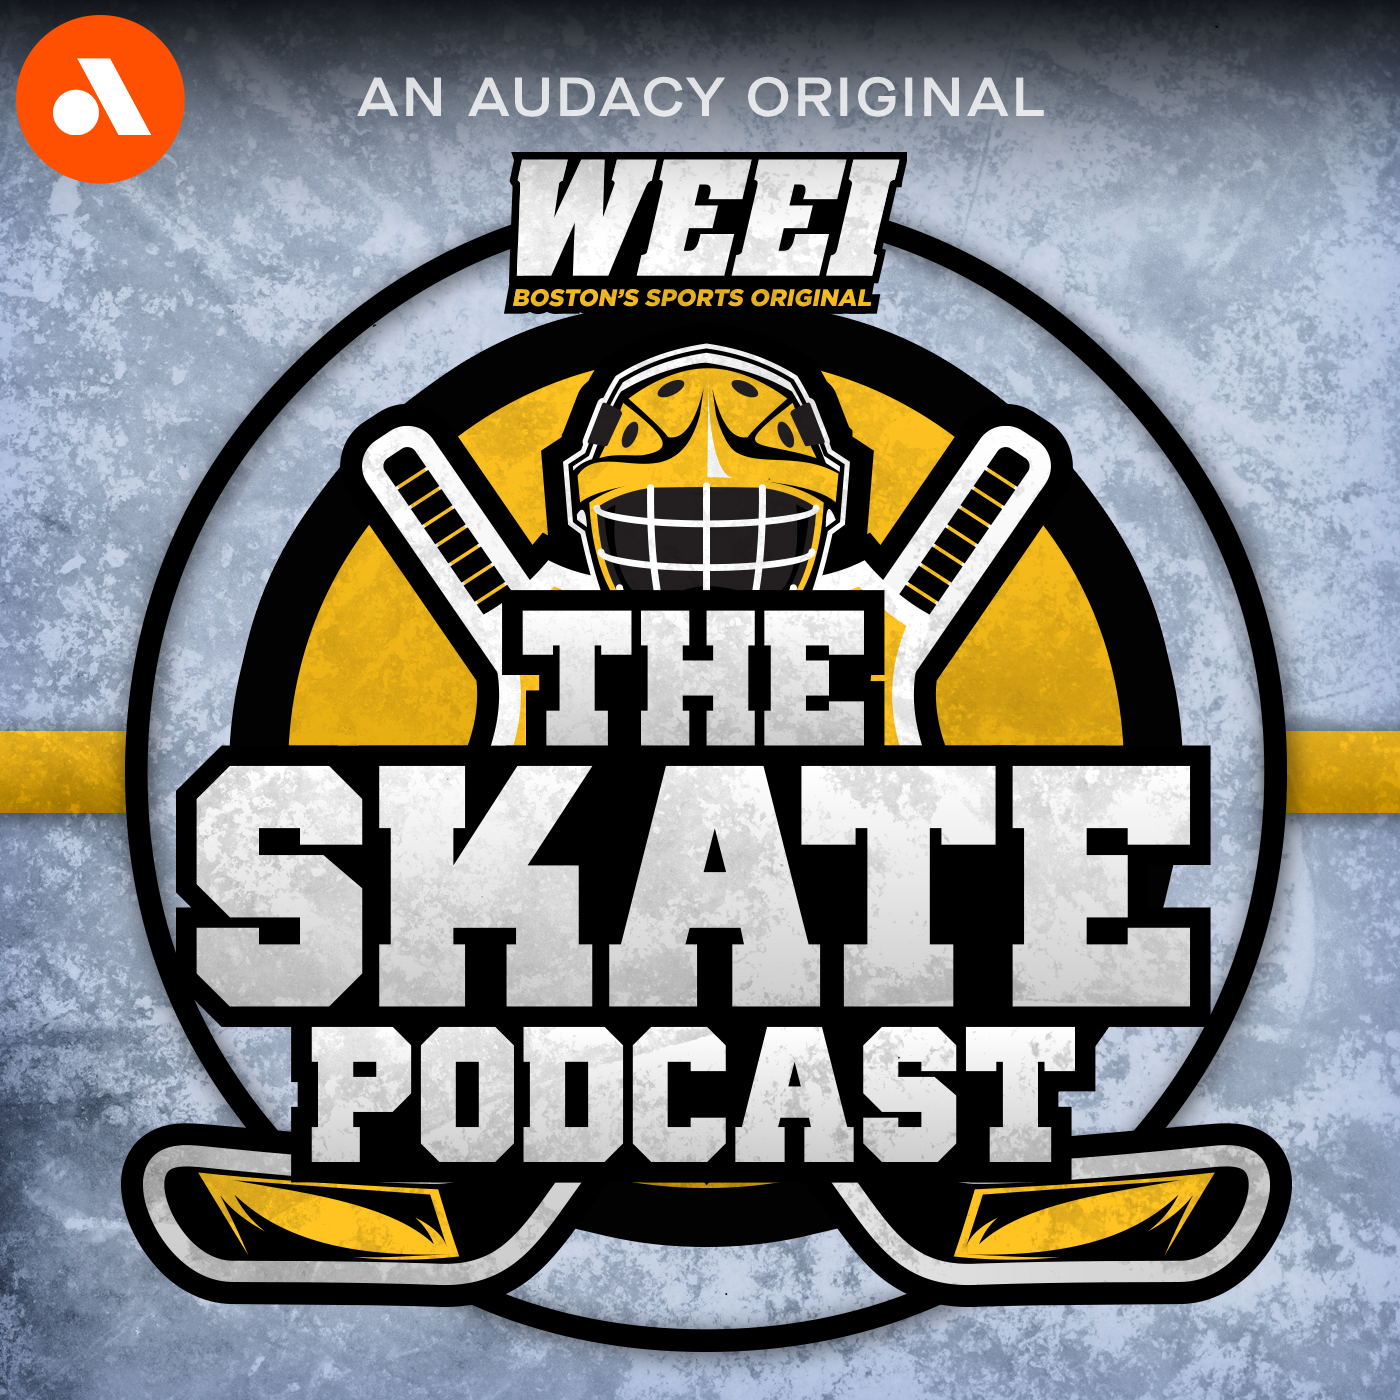 Should Bruins Make Big Changes To Power Play For Game 6? | 'The Skate Podcast'